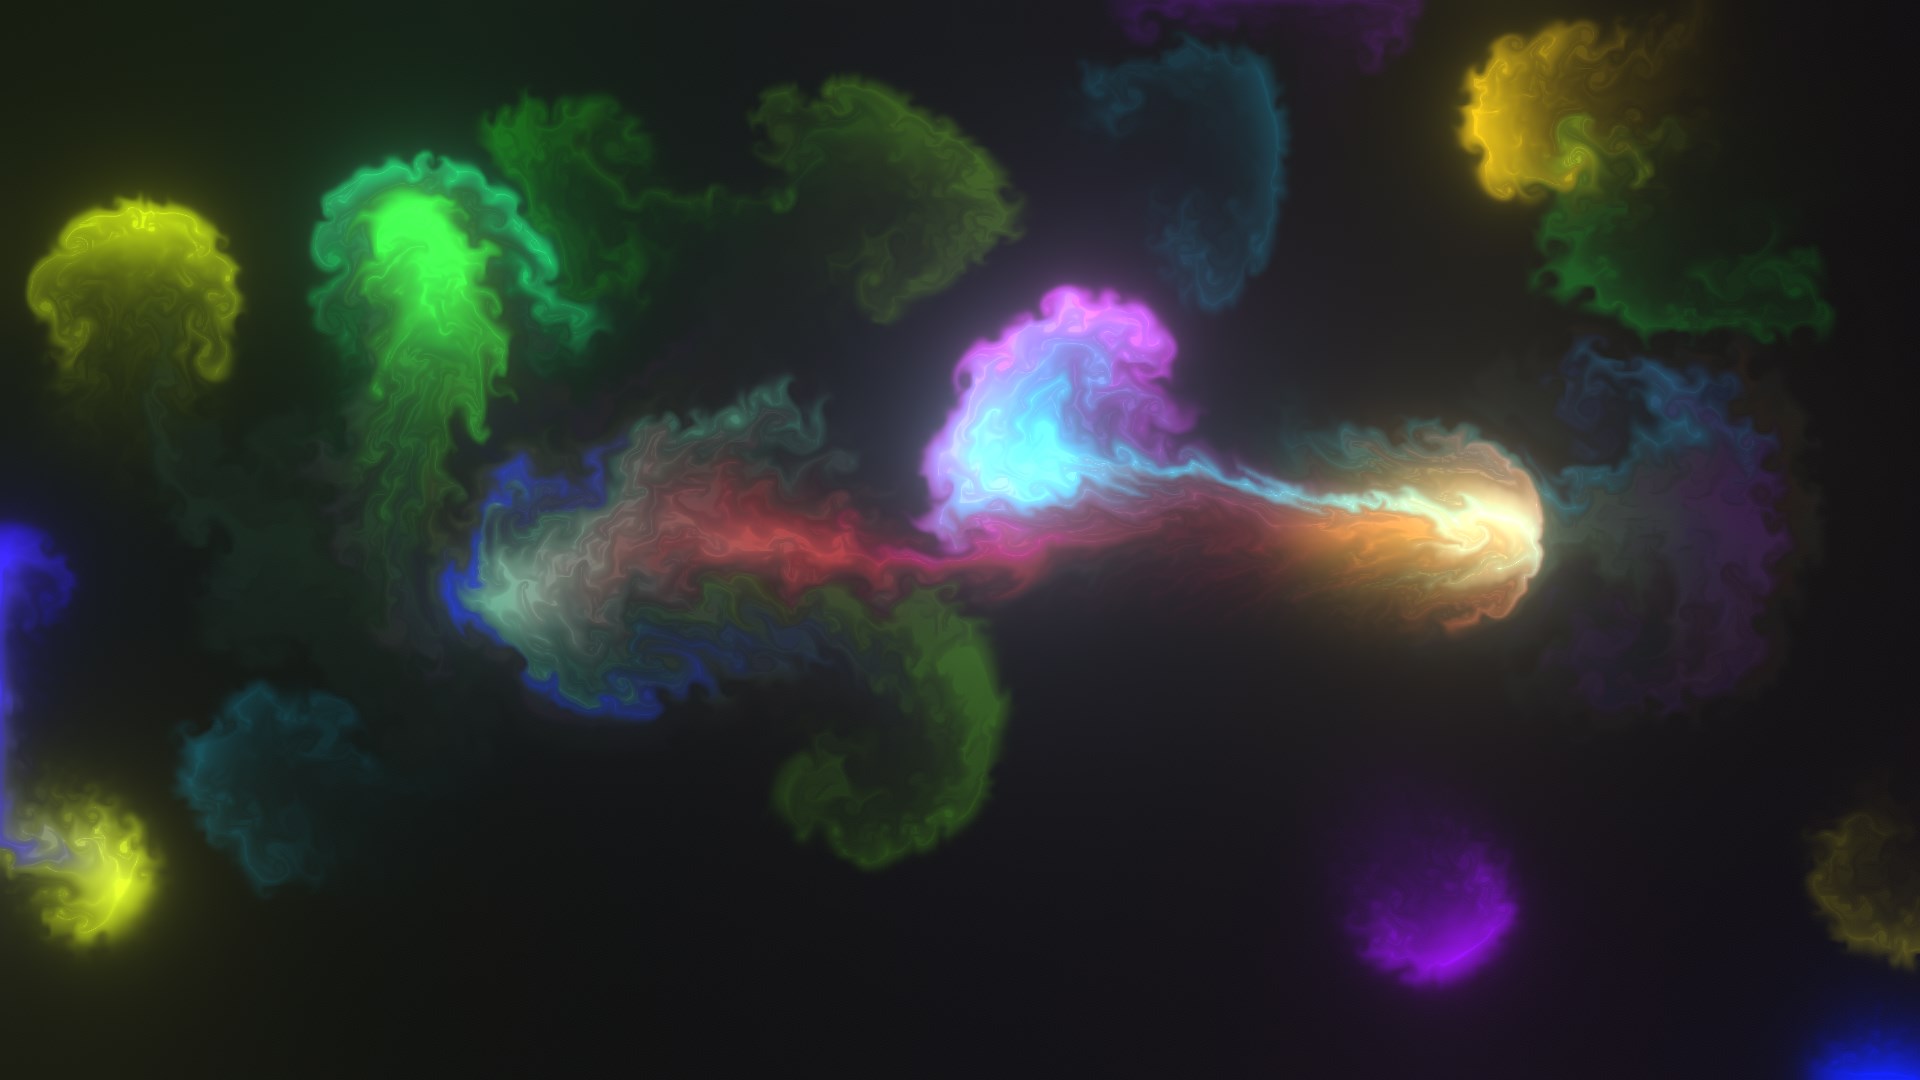 Colorful Fluid Animation (Audio Responsive) 3D Live Wallpaper [DOWNLOAD FREE]